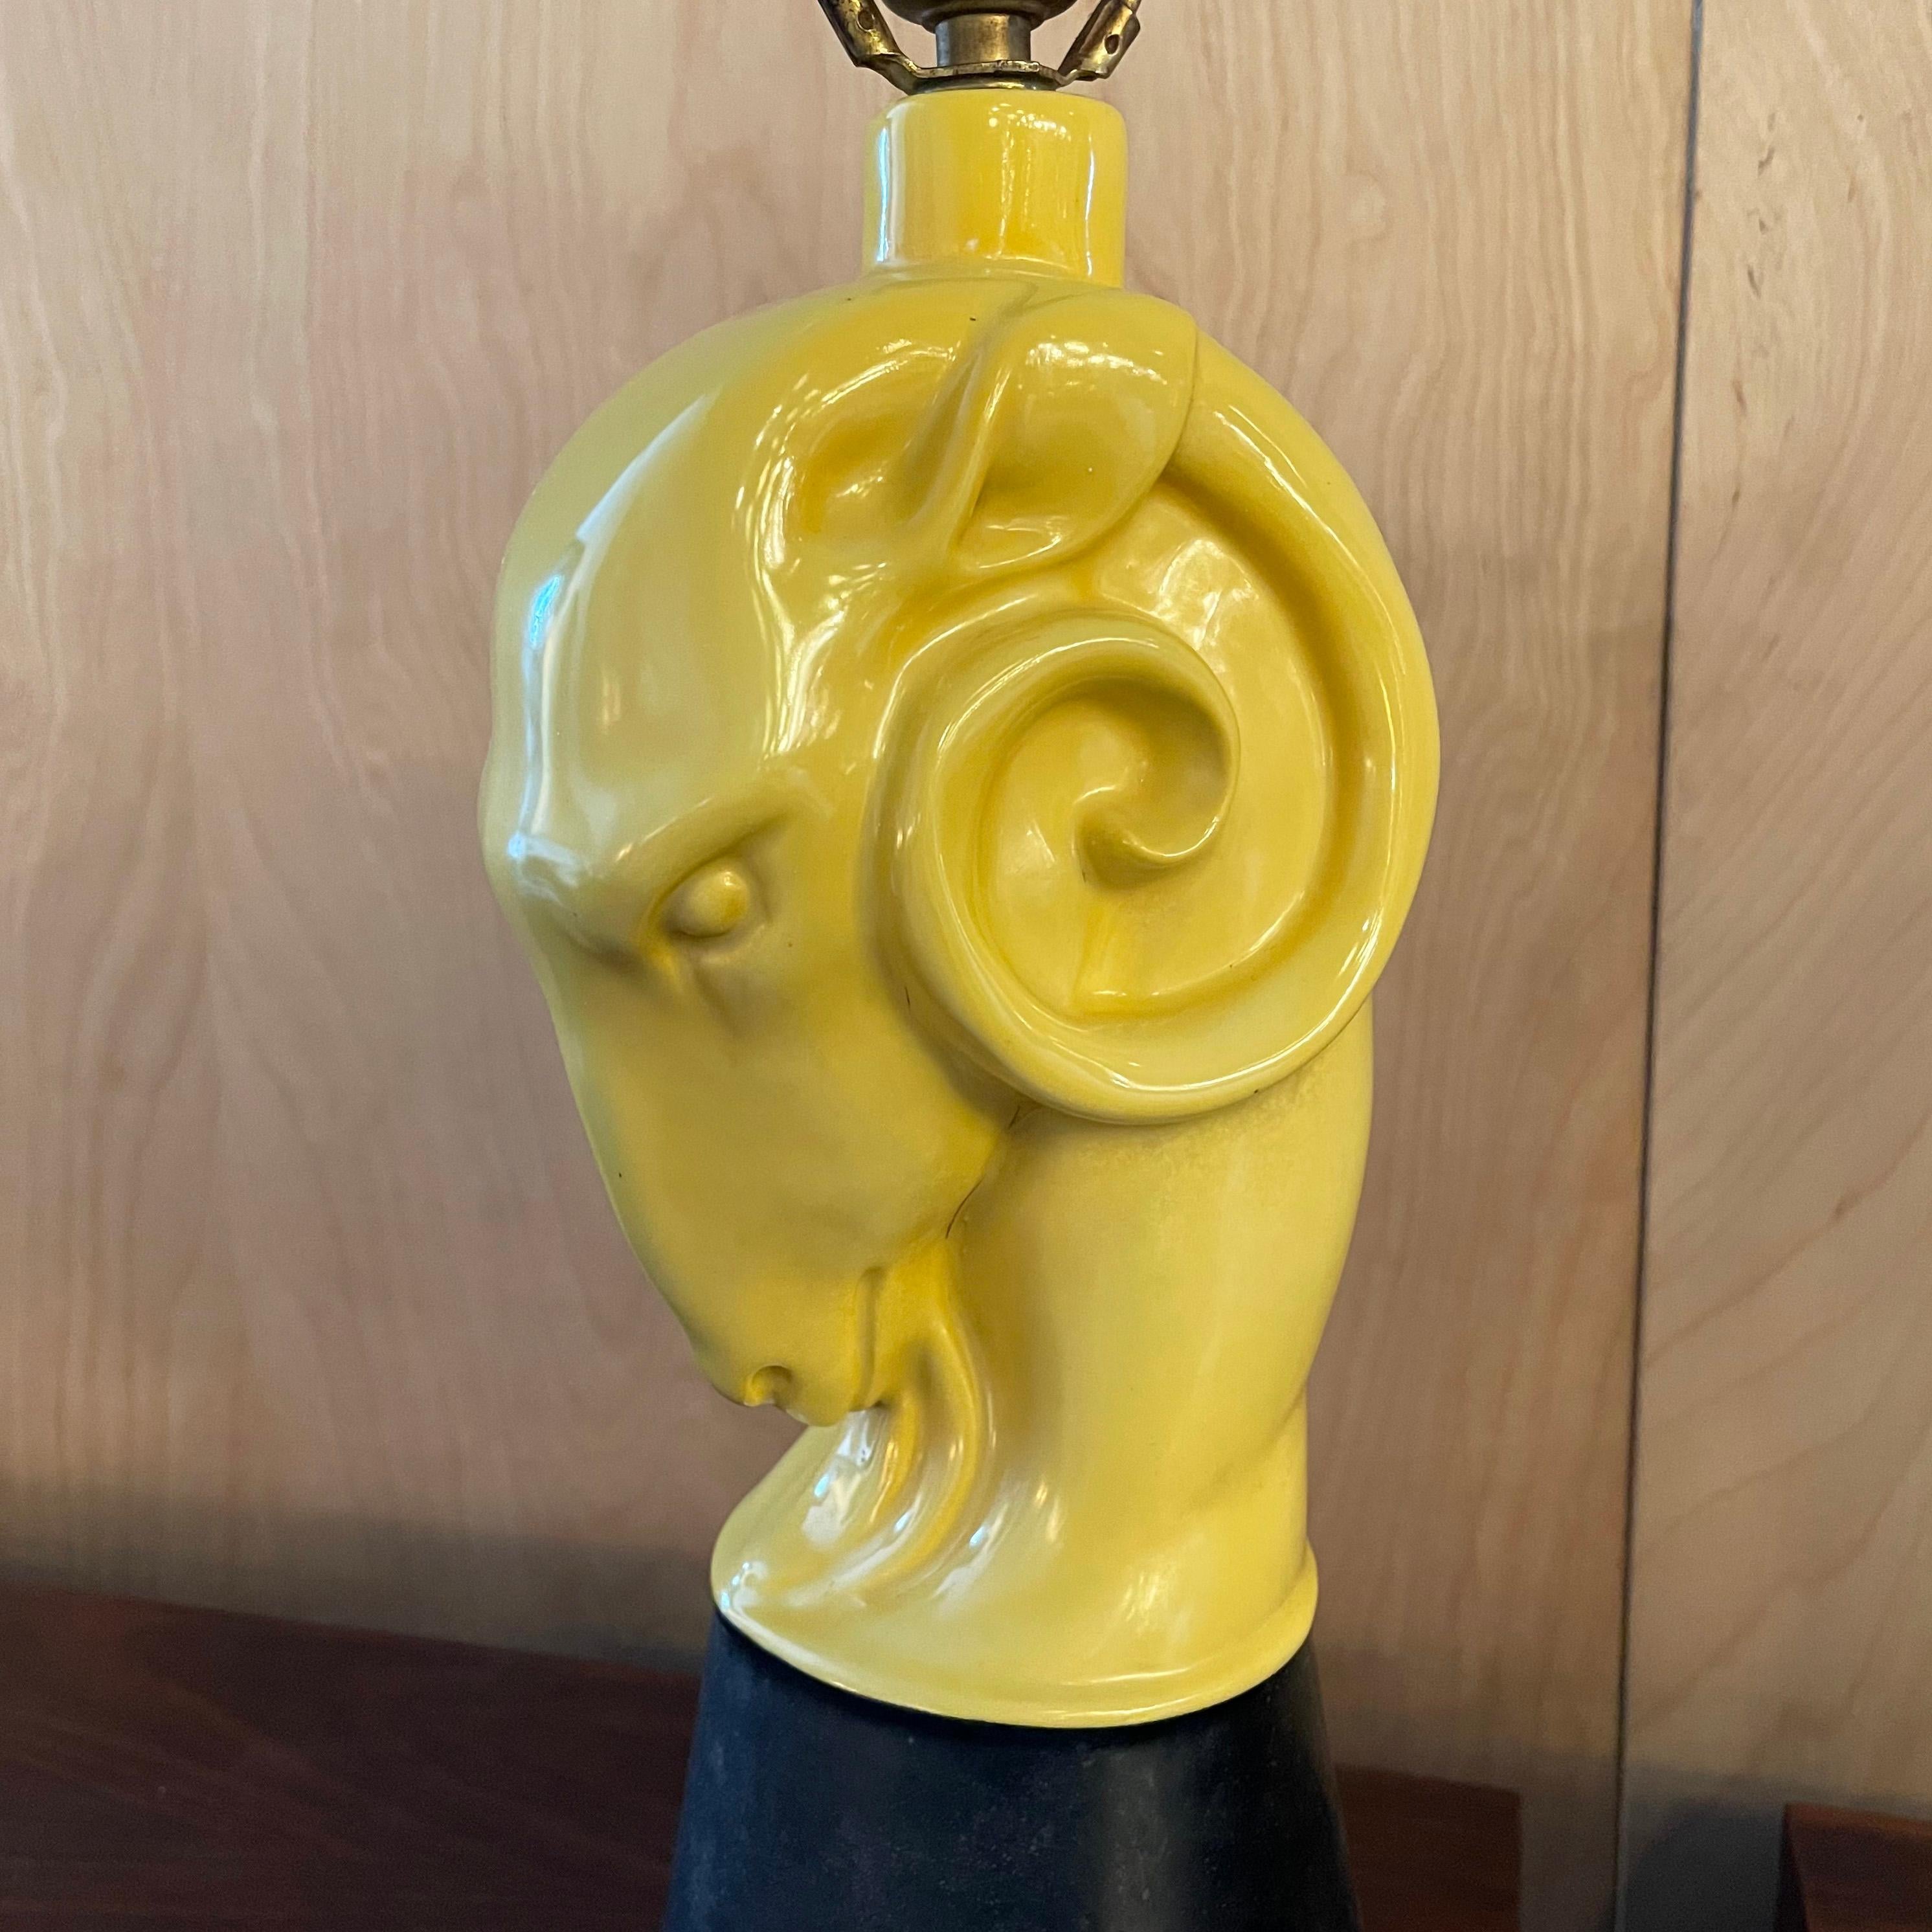 Midcentury, Hollywood Regency, high-glaze, yellow ceramic, figurative, ram's head table lamp with black matte ceramic base. A second ram's head table lamp is available in white, listed separately. The lamp is not should with a shade.
  